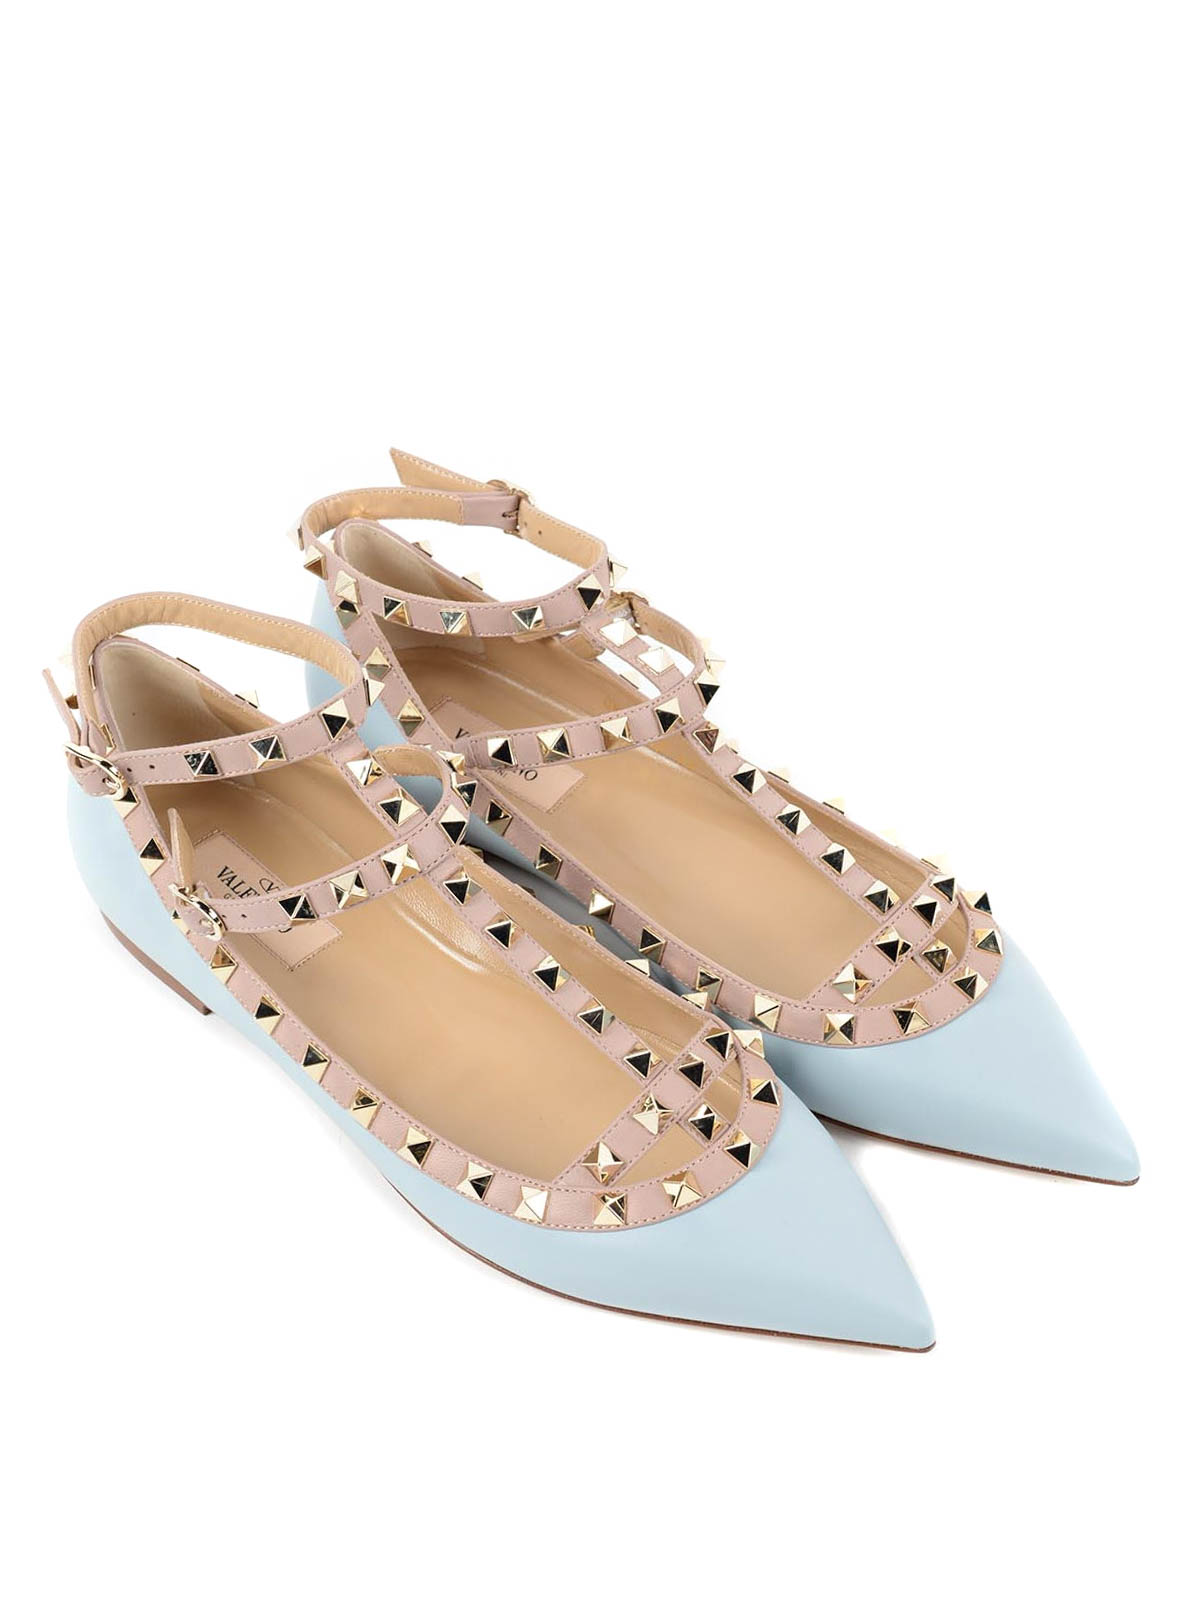 Valentino Rockstud Leather Flats (1 180 590 LBP) ❤ Liked On Polyvore Featuring Shoes, Flats, Gre… Leather Ballet Shoes, Grey Flats Shoes, Valentino Rockstud Flats |